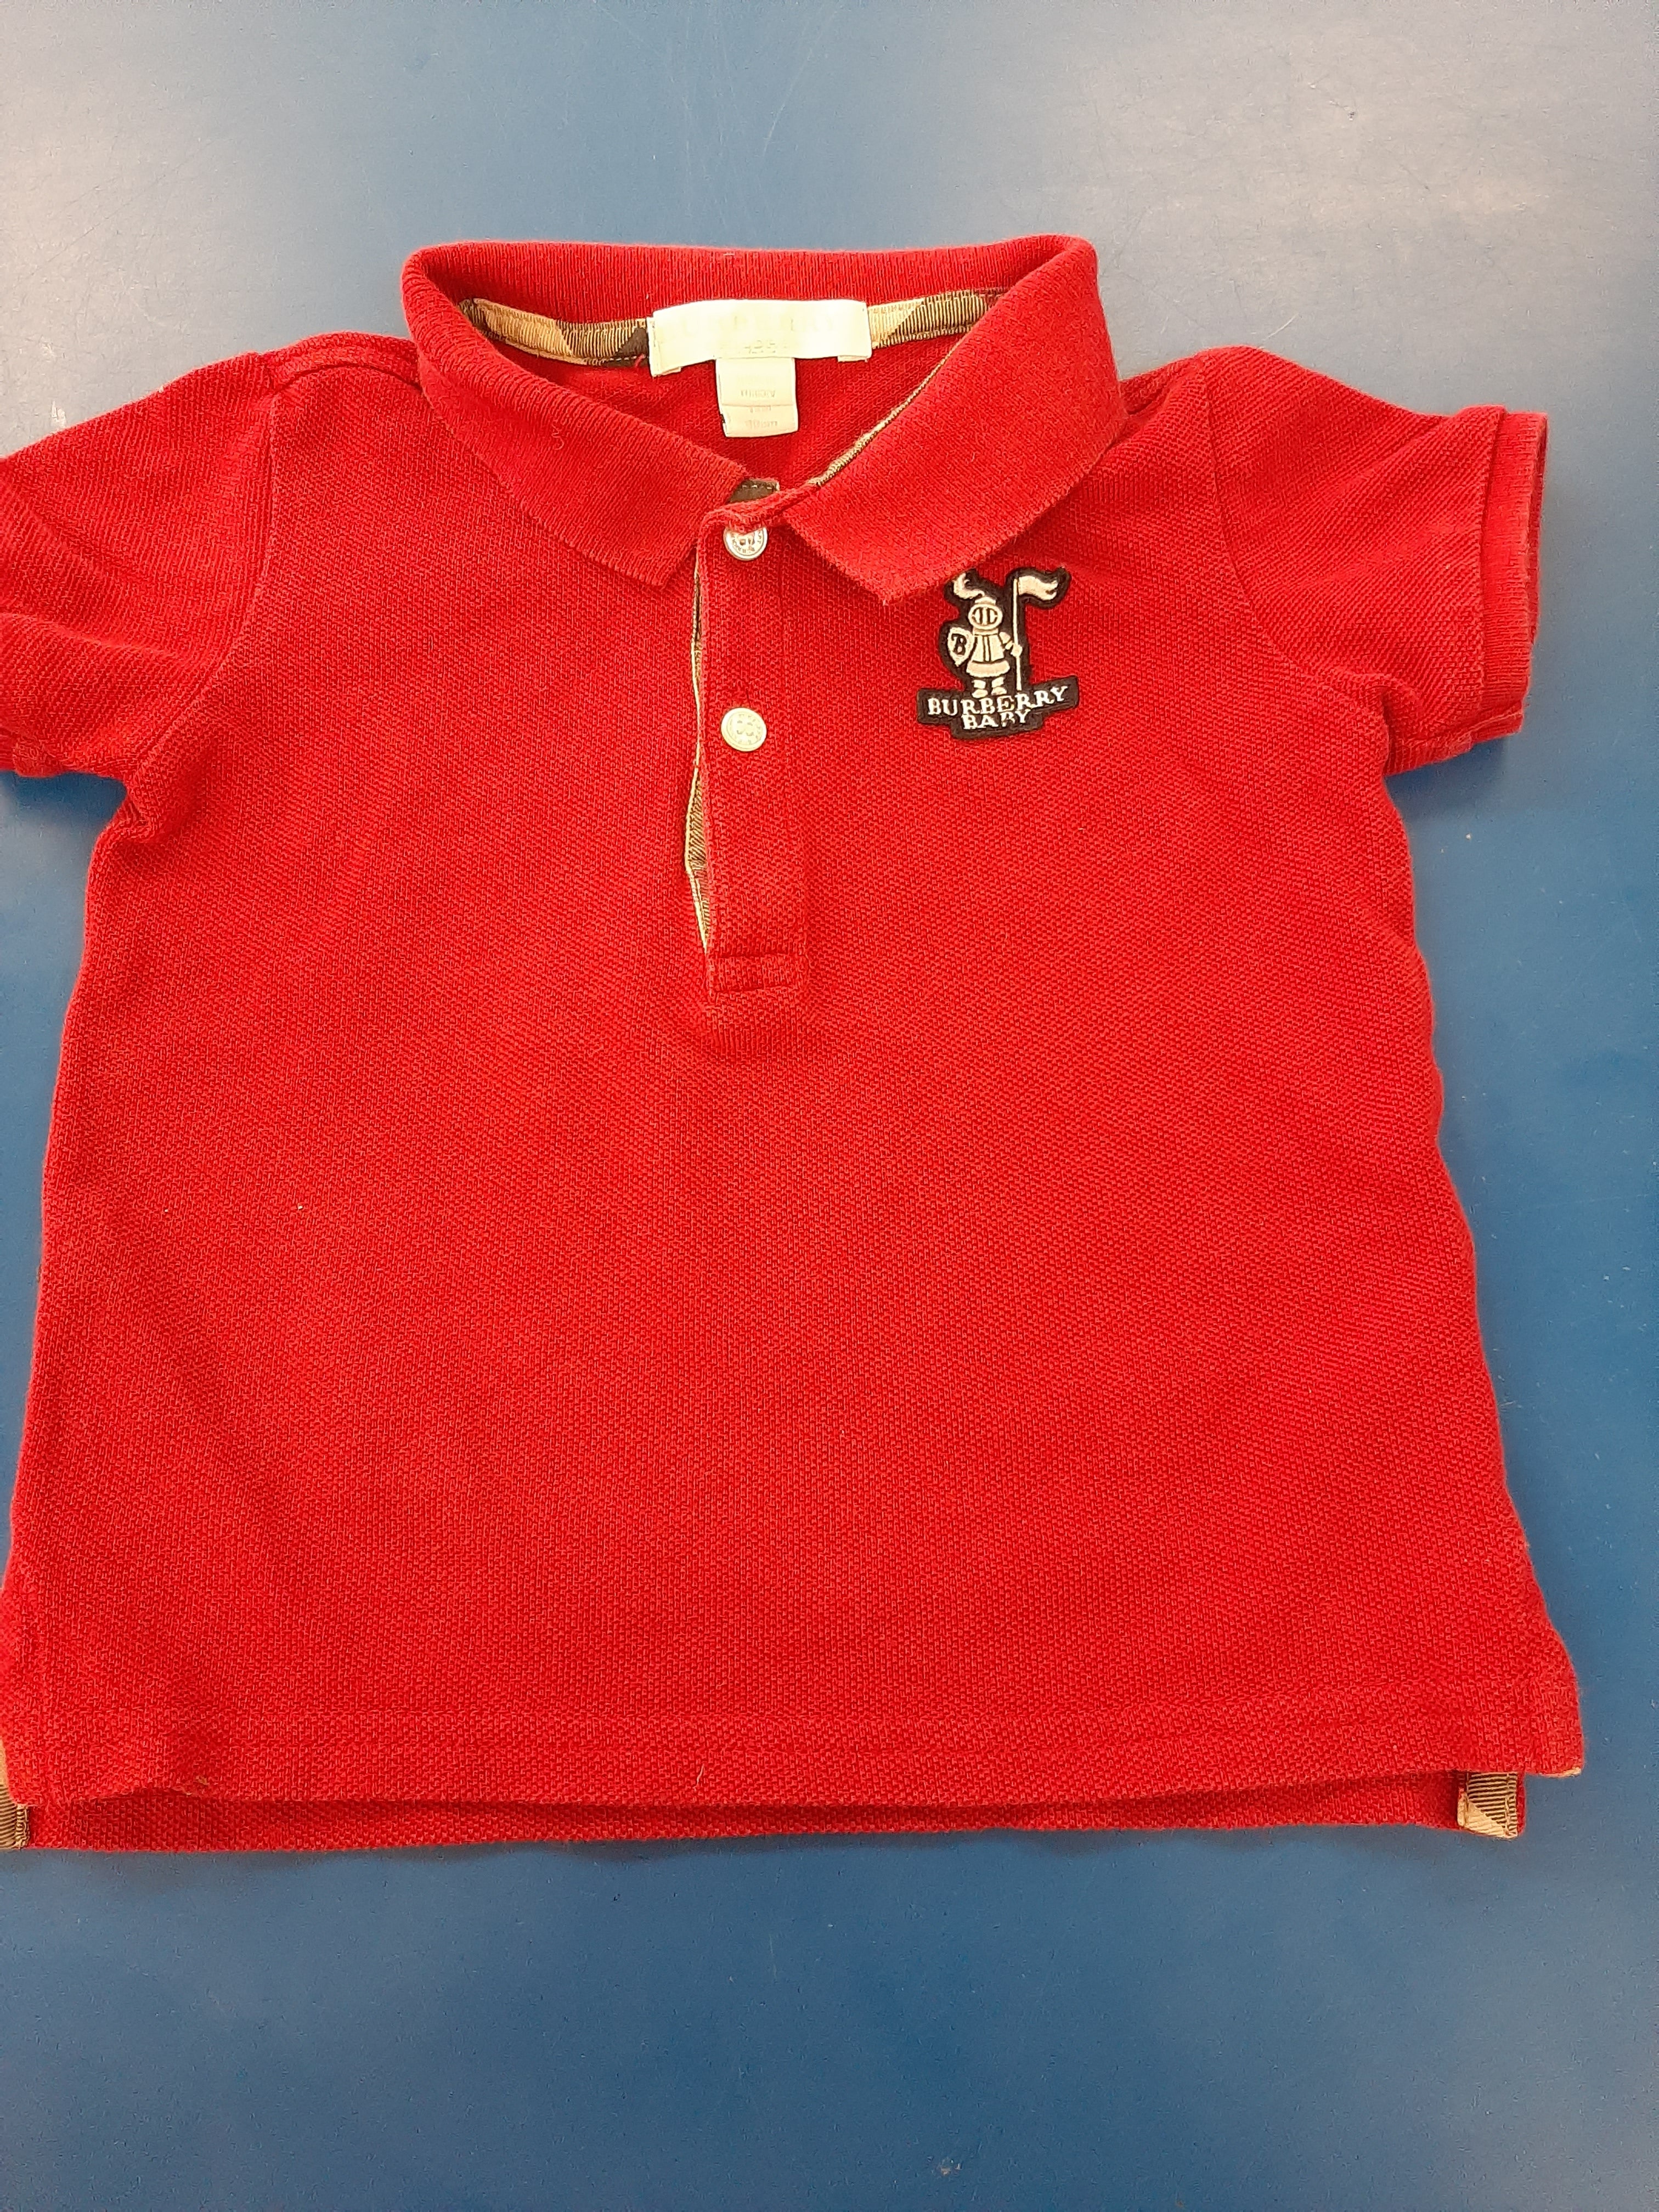 Burberry Baby Red Polo Shirt Boys Size 12M